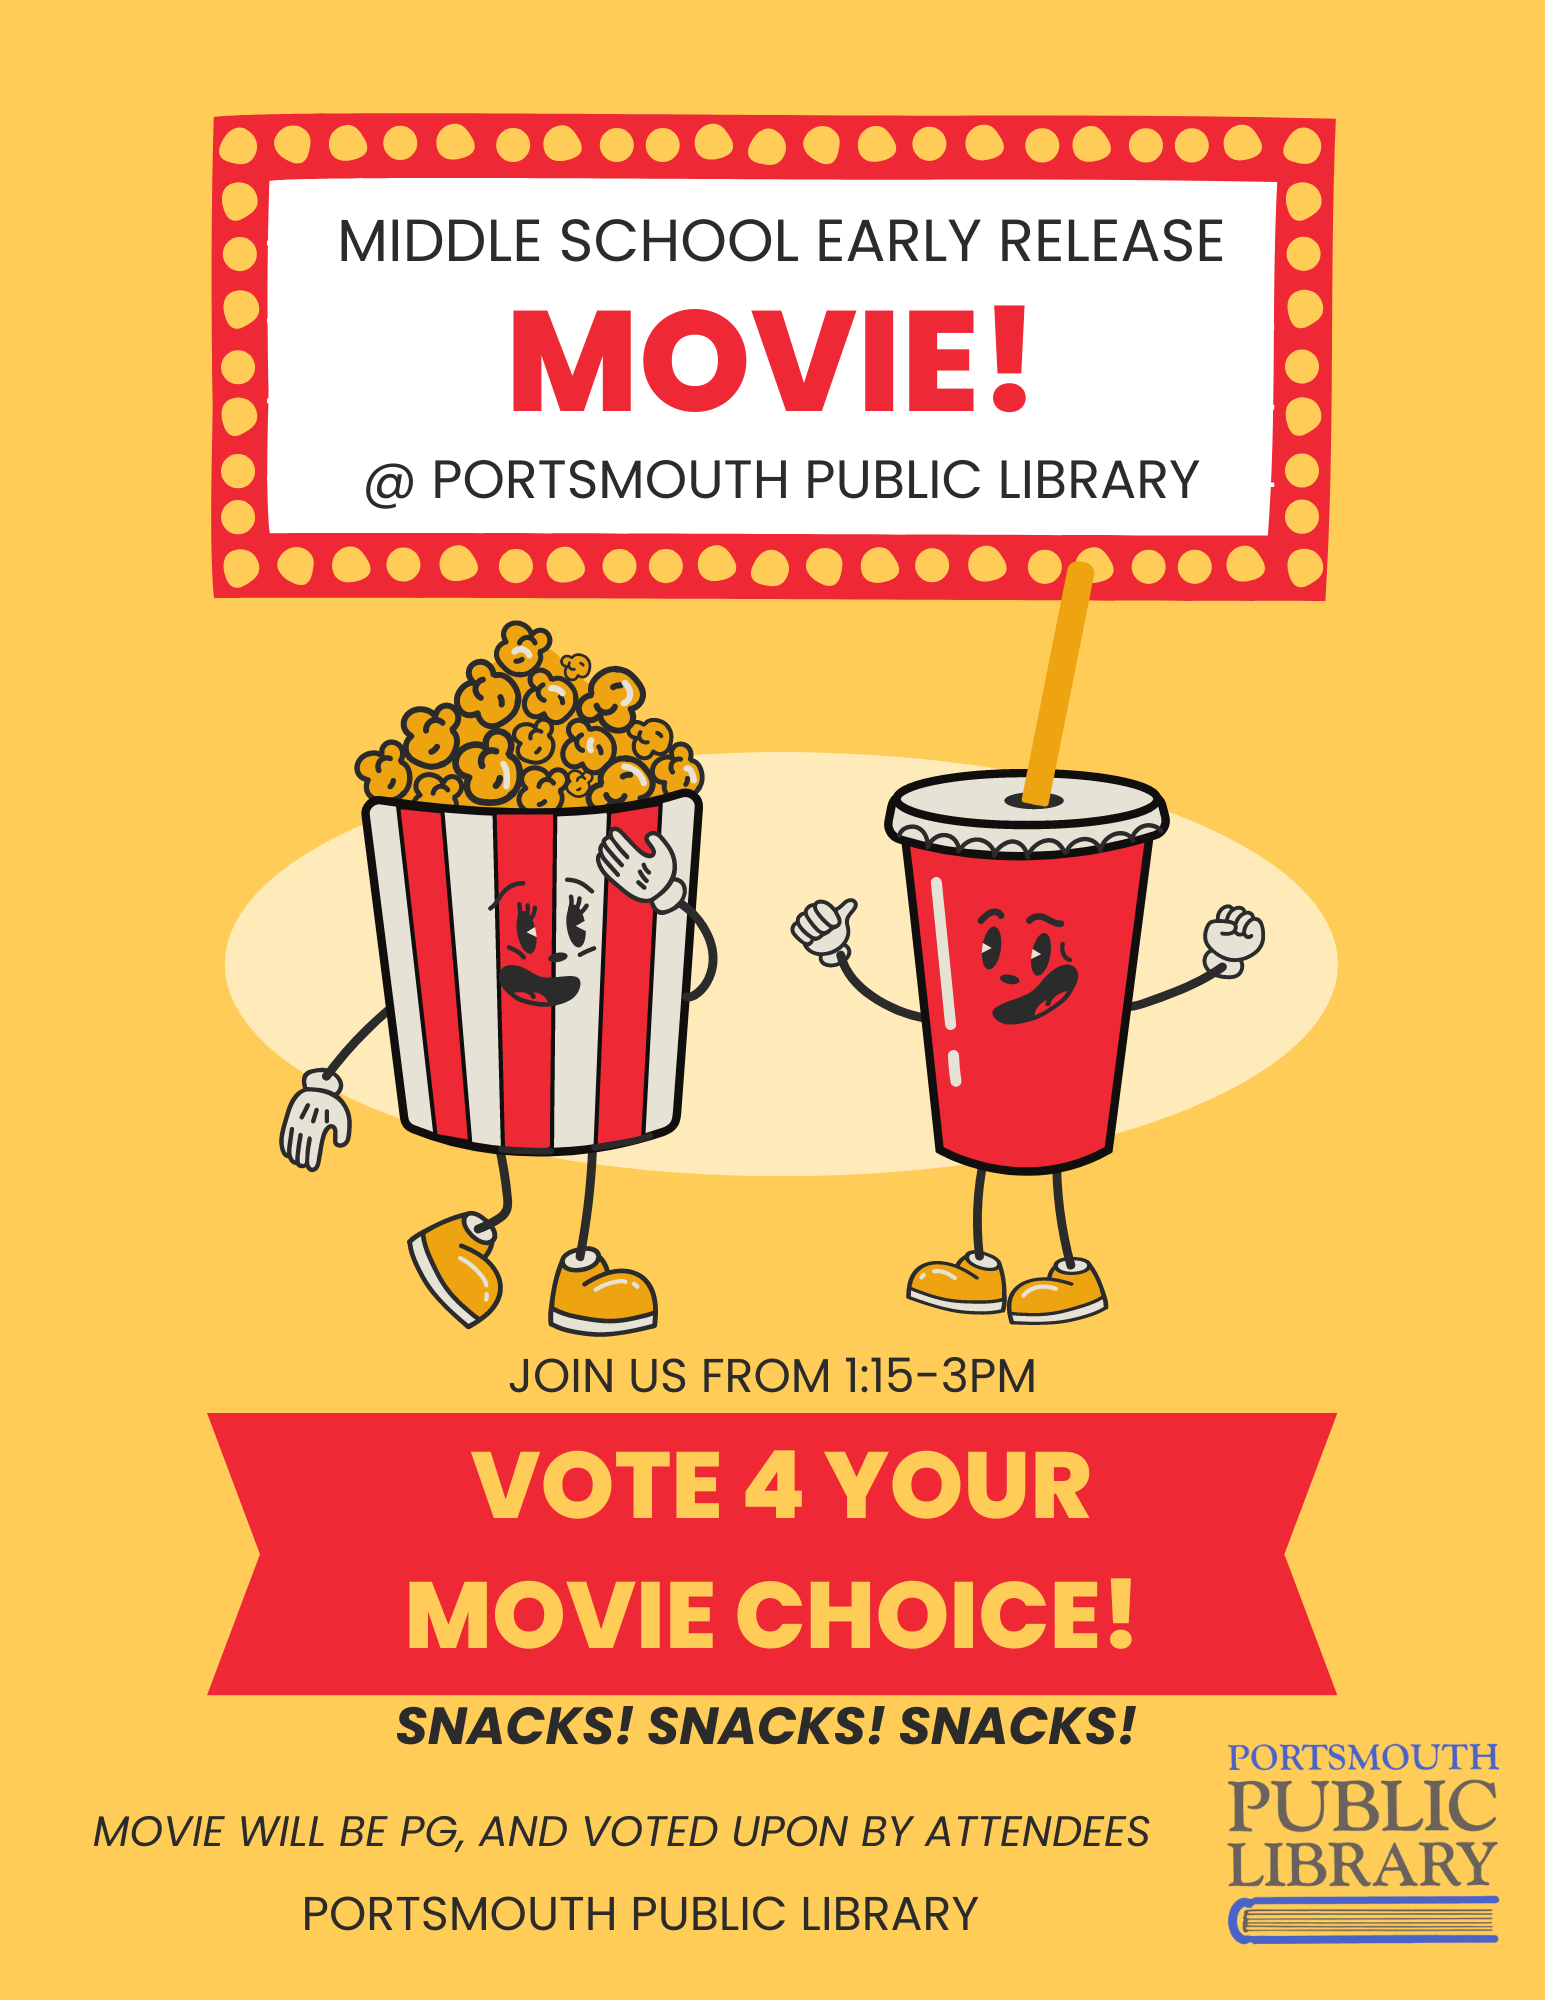 Text reads Middle School Early Release Movie @ Portsmouth Public Library. Join us from 1:15-3pm. Vote for your movie choice. Snacks! Snacks! Snacks! Movie will be PG and will be voted upon by attendees. Portsmouth Public Library. there is an image of a cartoon popcorn tub and soda in the center, and a logo for Portsmouth Public Library in the lower right corner